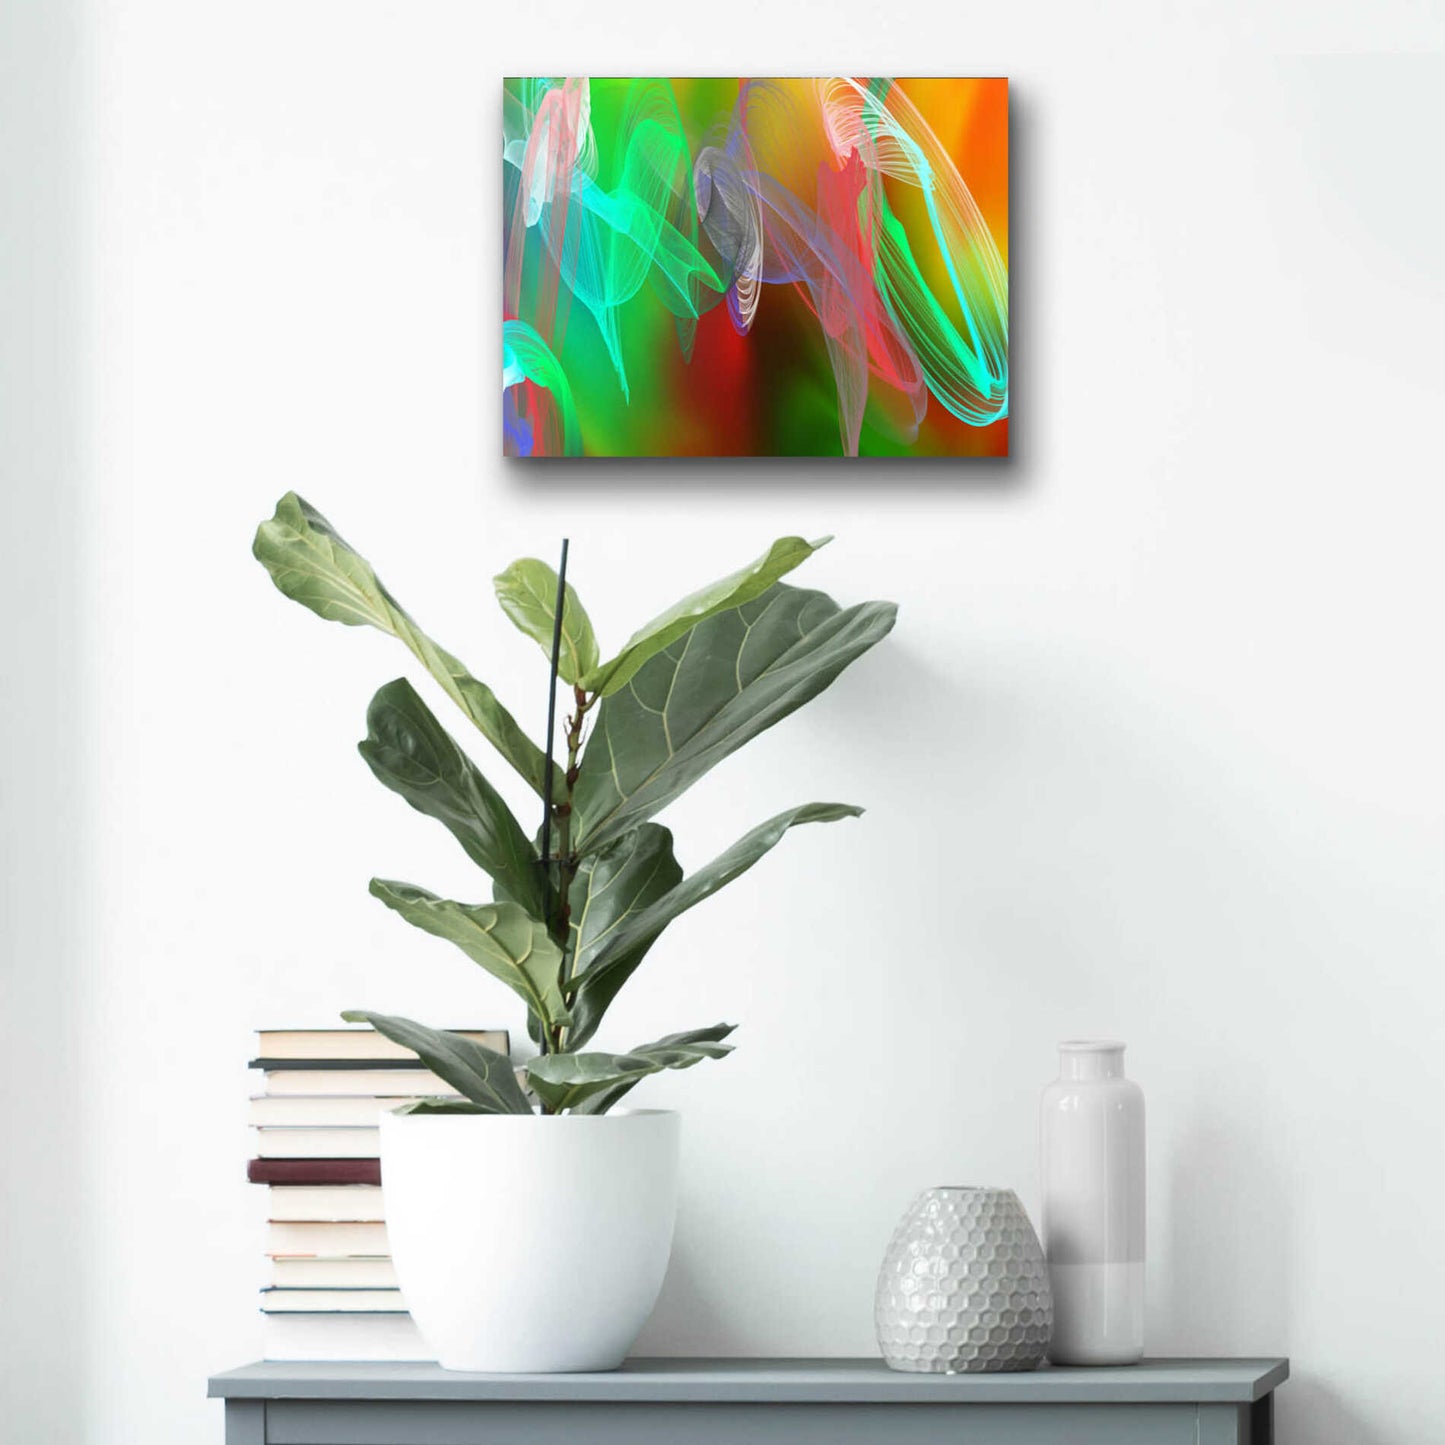 Epic Art 'Inverted Color In The Lines 7' by Irena Orlov Acrylic Glass Wall Art,16x12